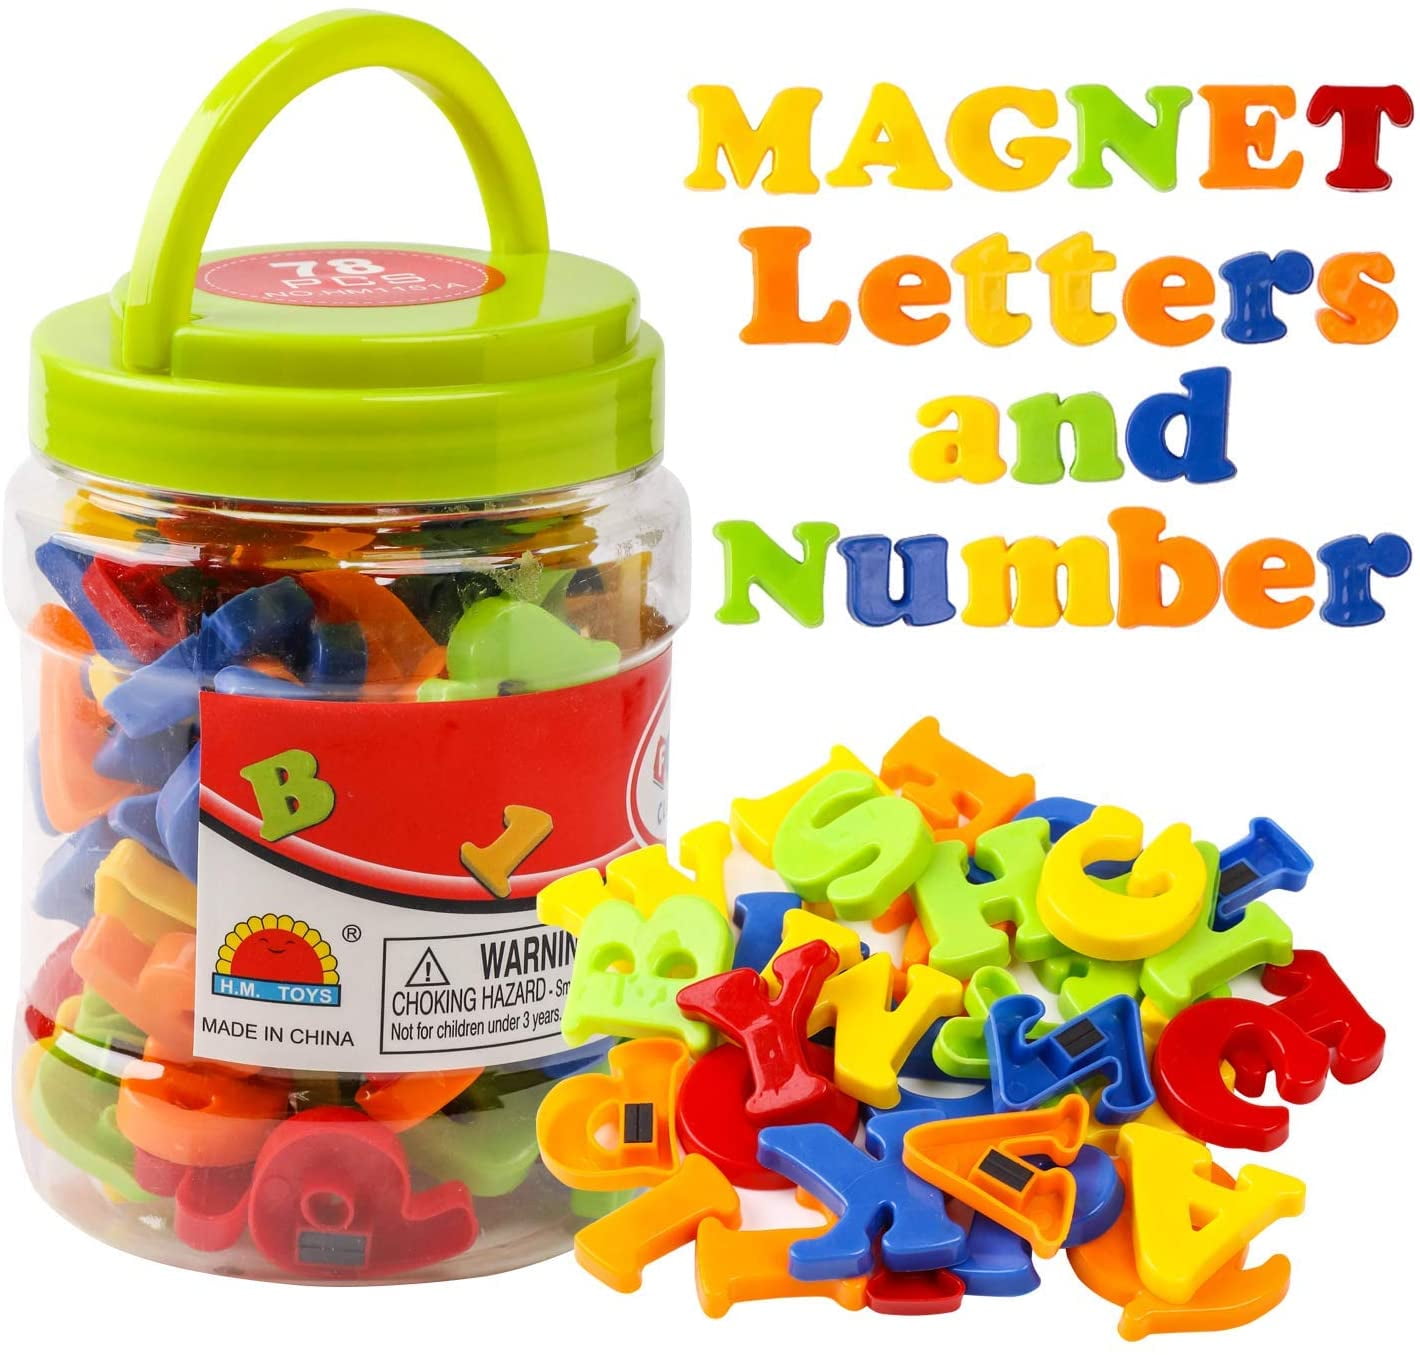 Fridge Magnets Lowercase Alphabet Numbers & Letters MAGNETIC BABY home schooling 